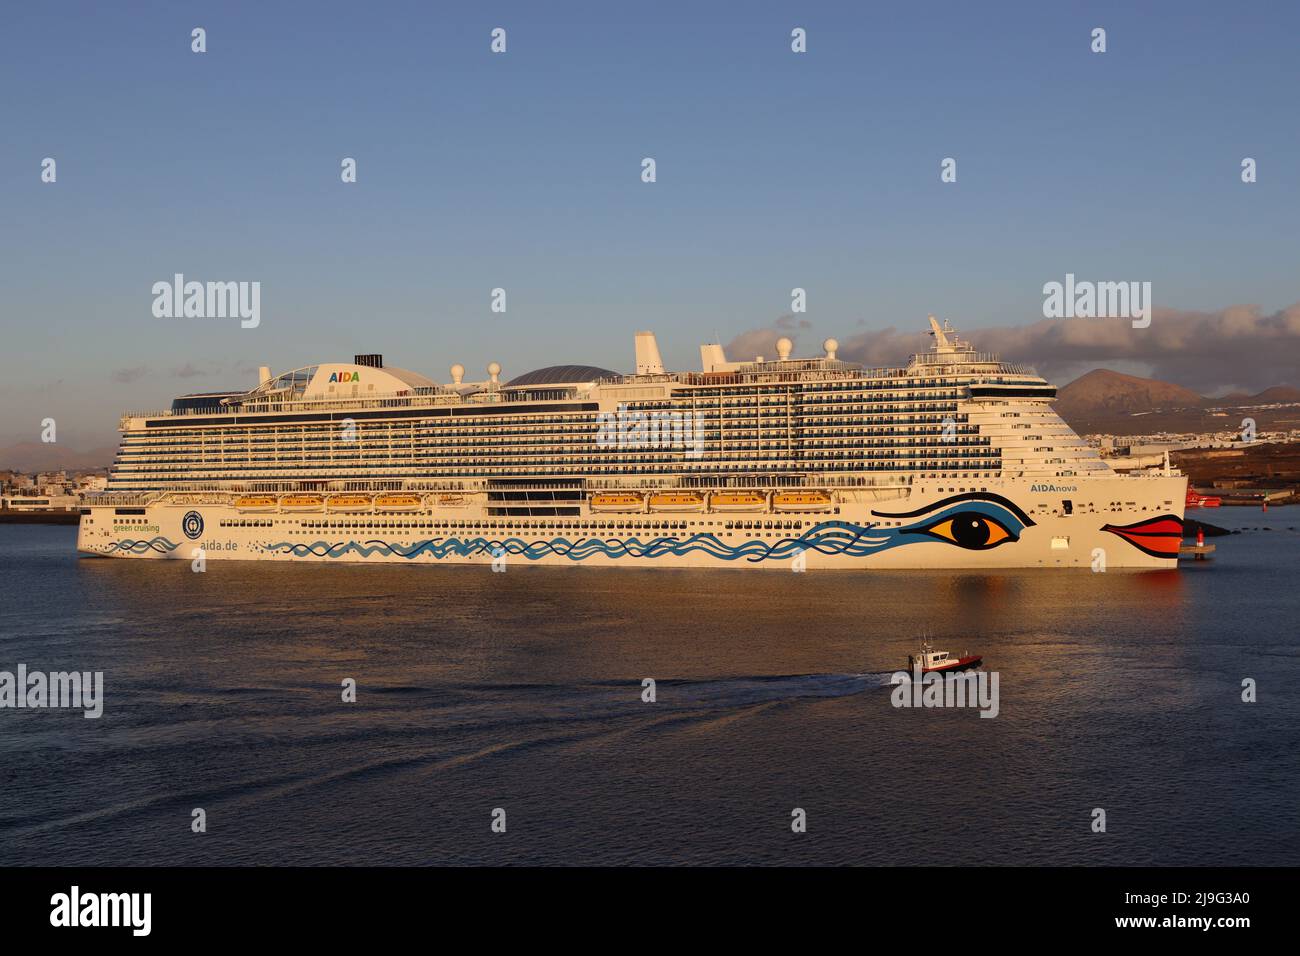 A Pilot boat is dwarfed by the 184,000  ton German cruise ship AIDAnova bathed in early morning sunlight Stock Photo